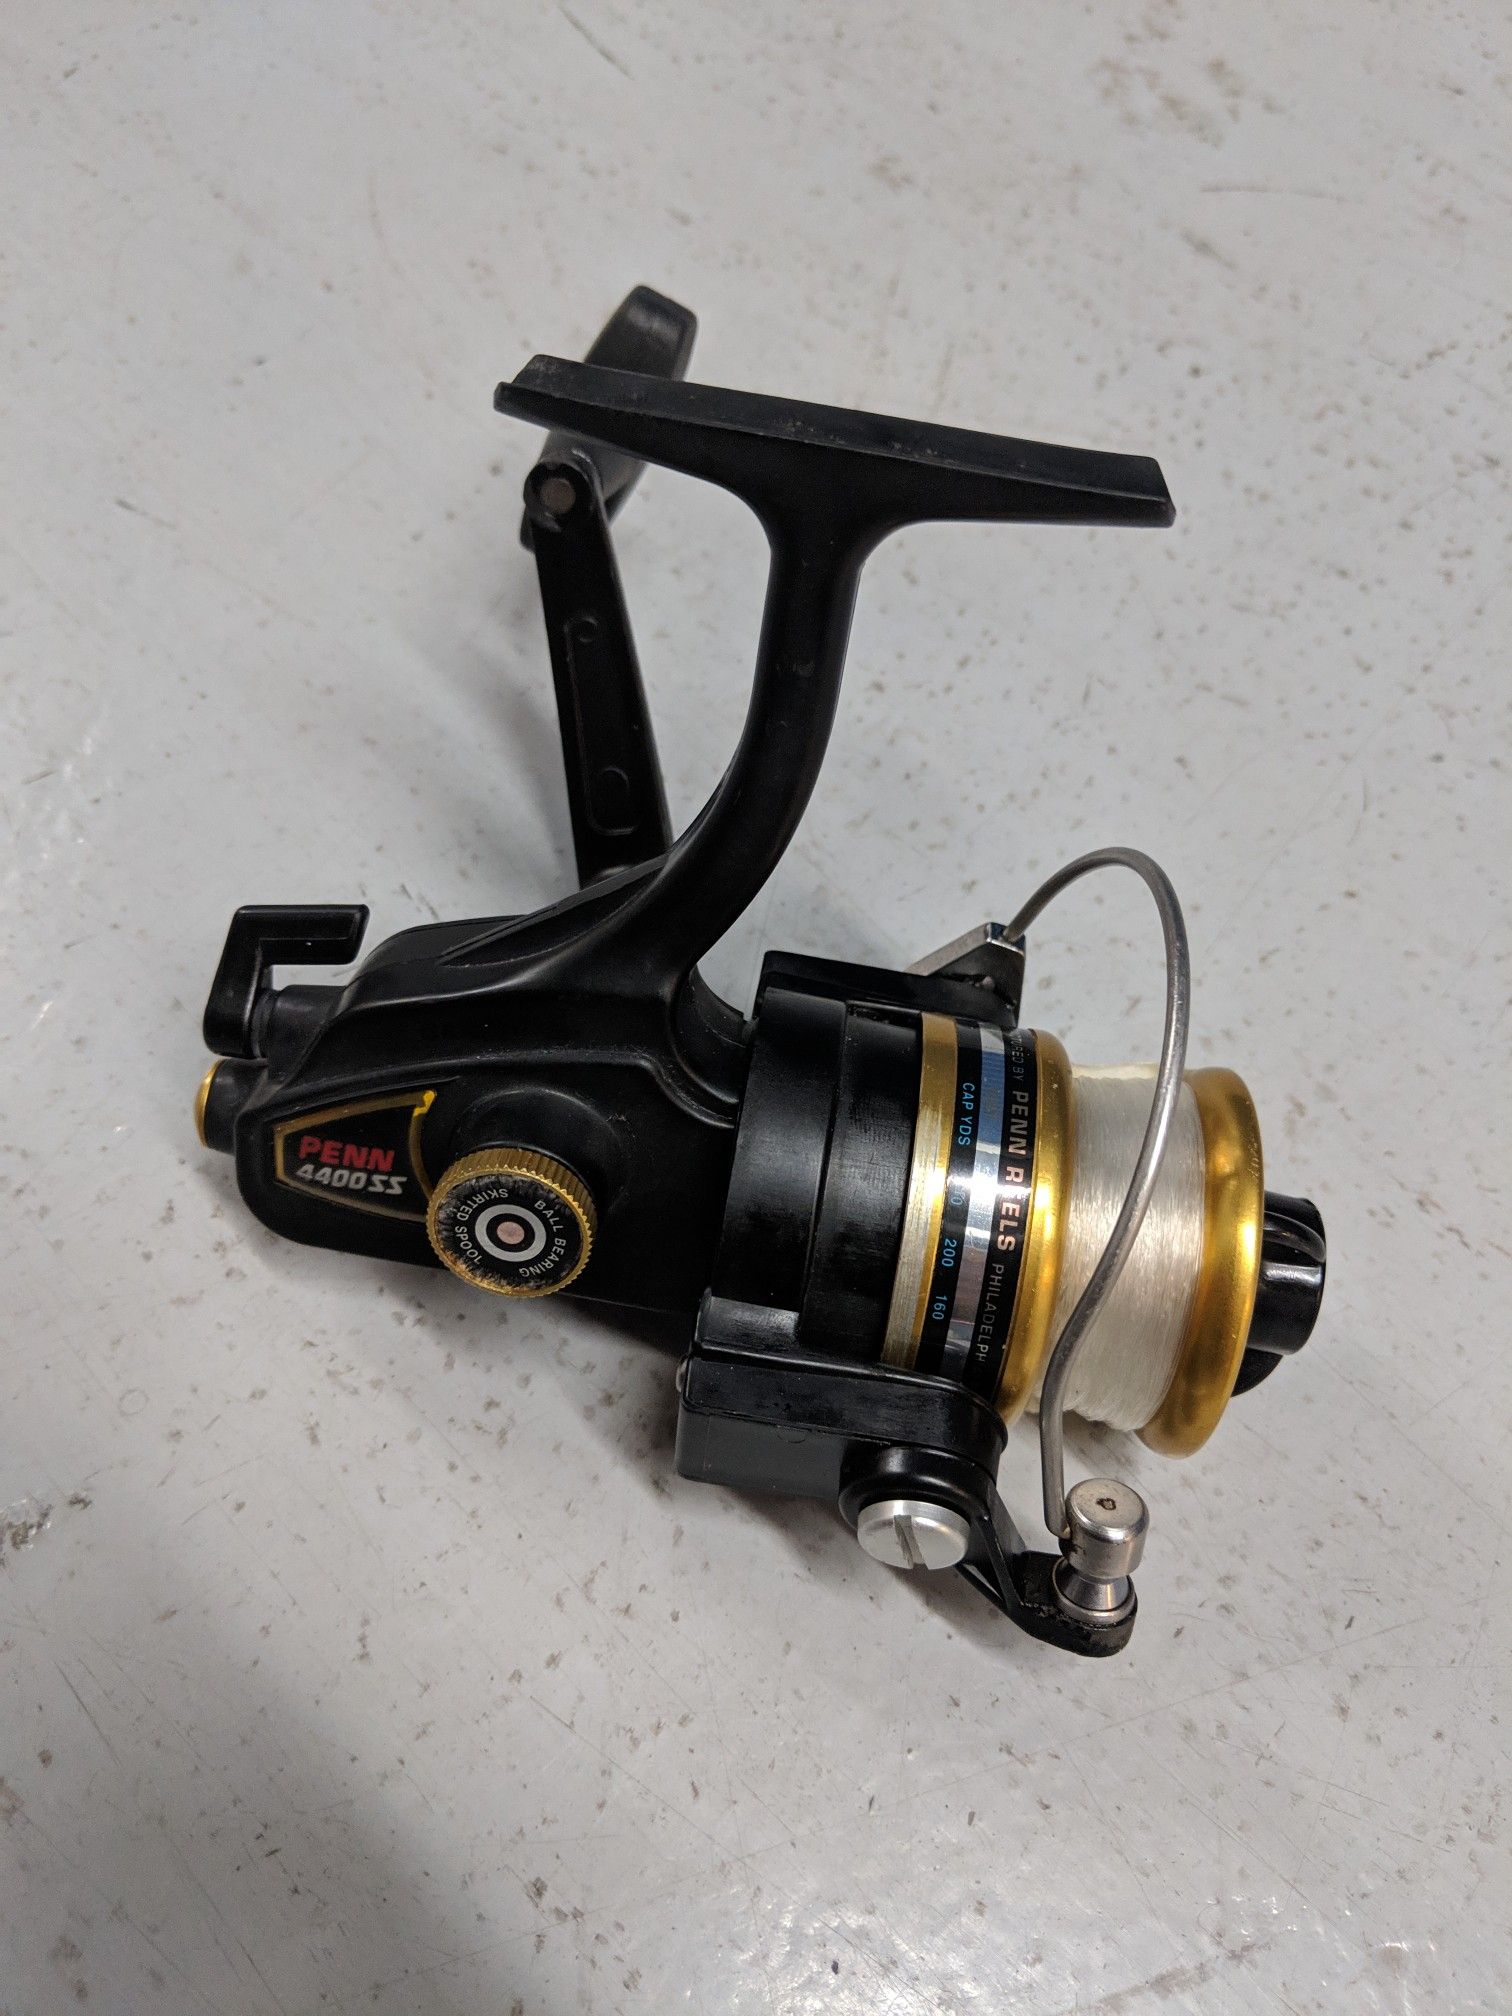 Penn 4400 SS Spinning Reel. Good Condition. Ready for fishing. for